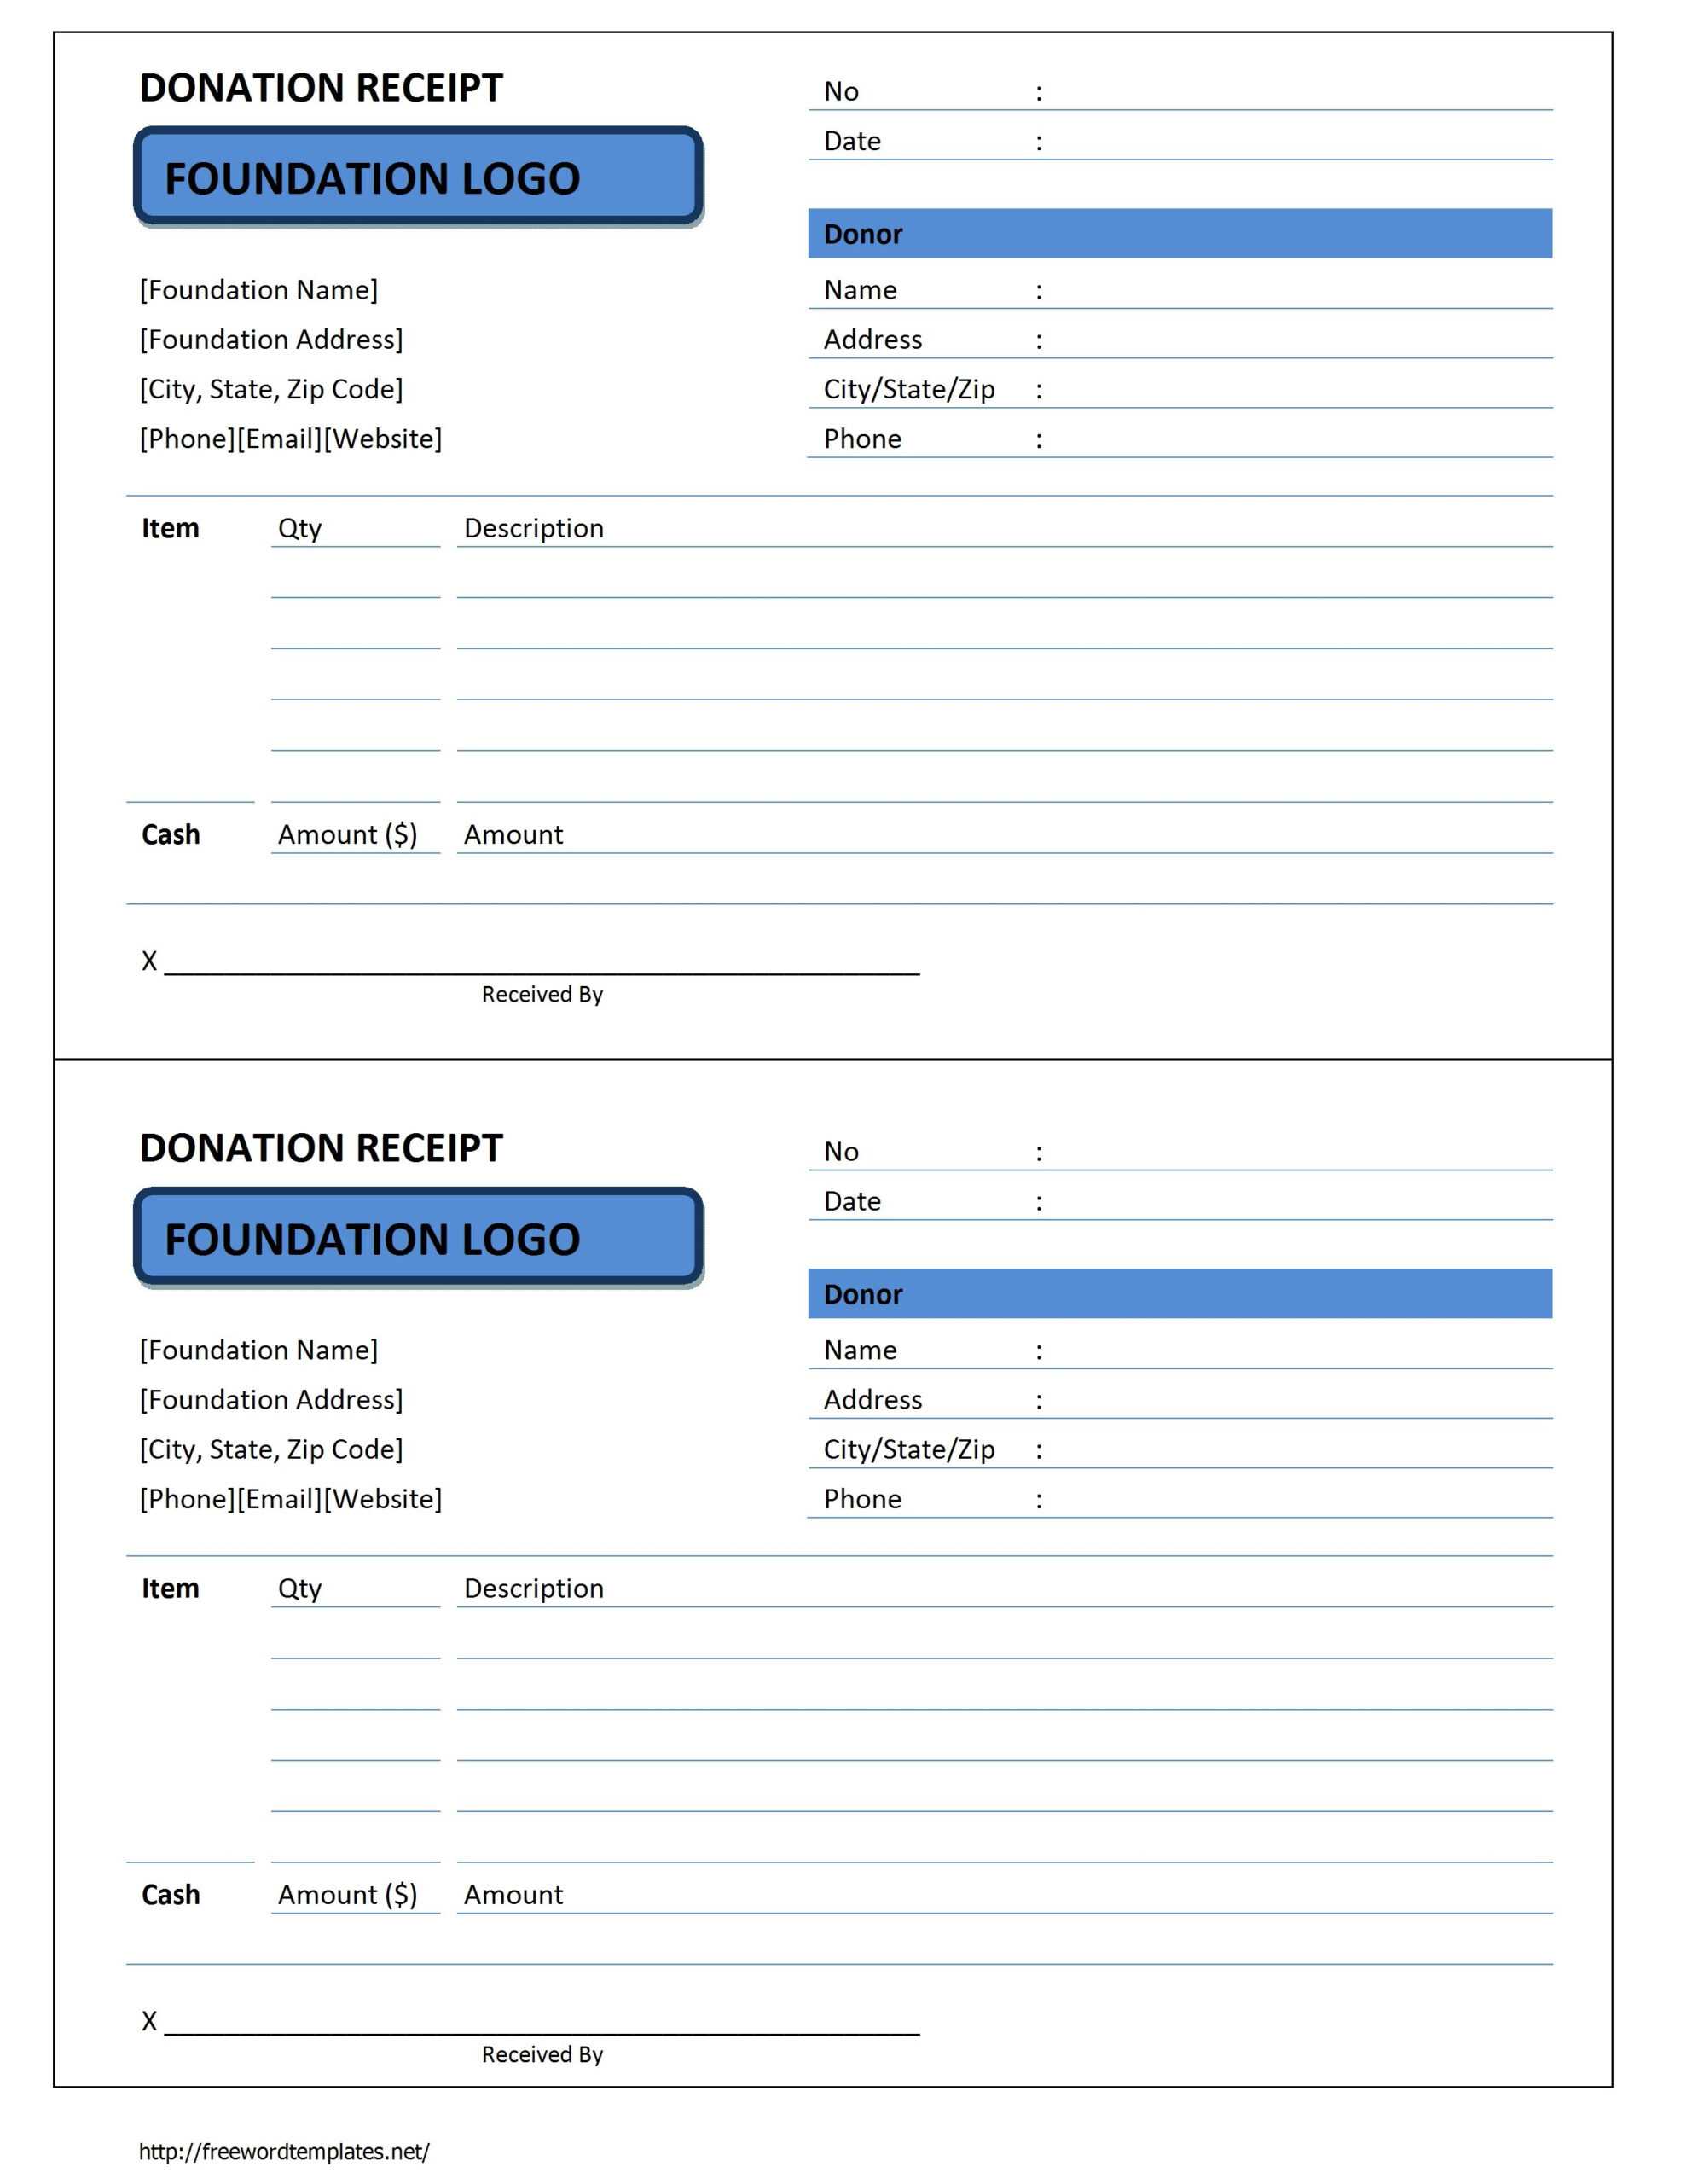 Tax Donation Receipt Template 1 | Receipt Template In Donation Report Template